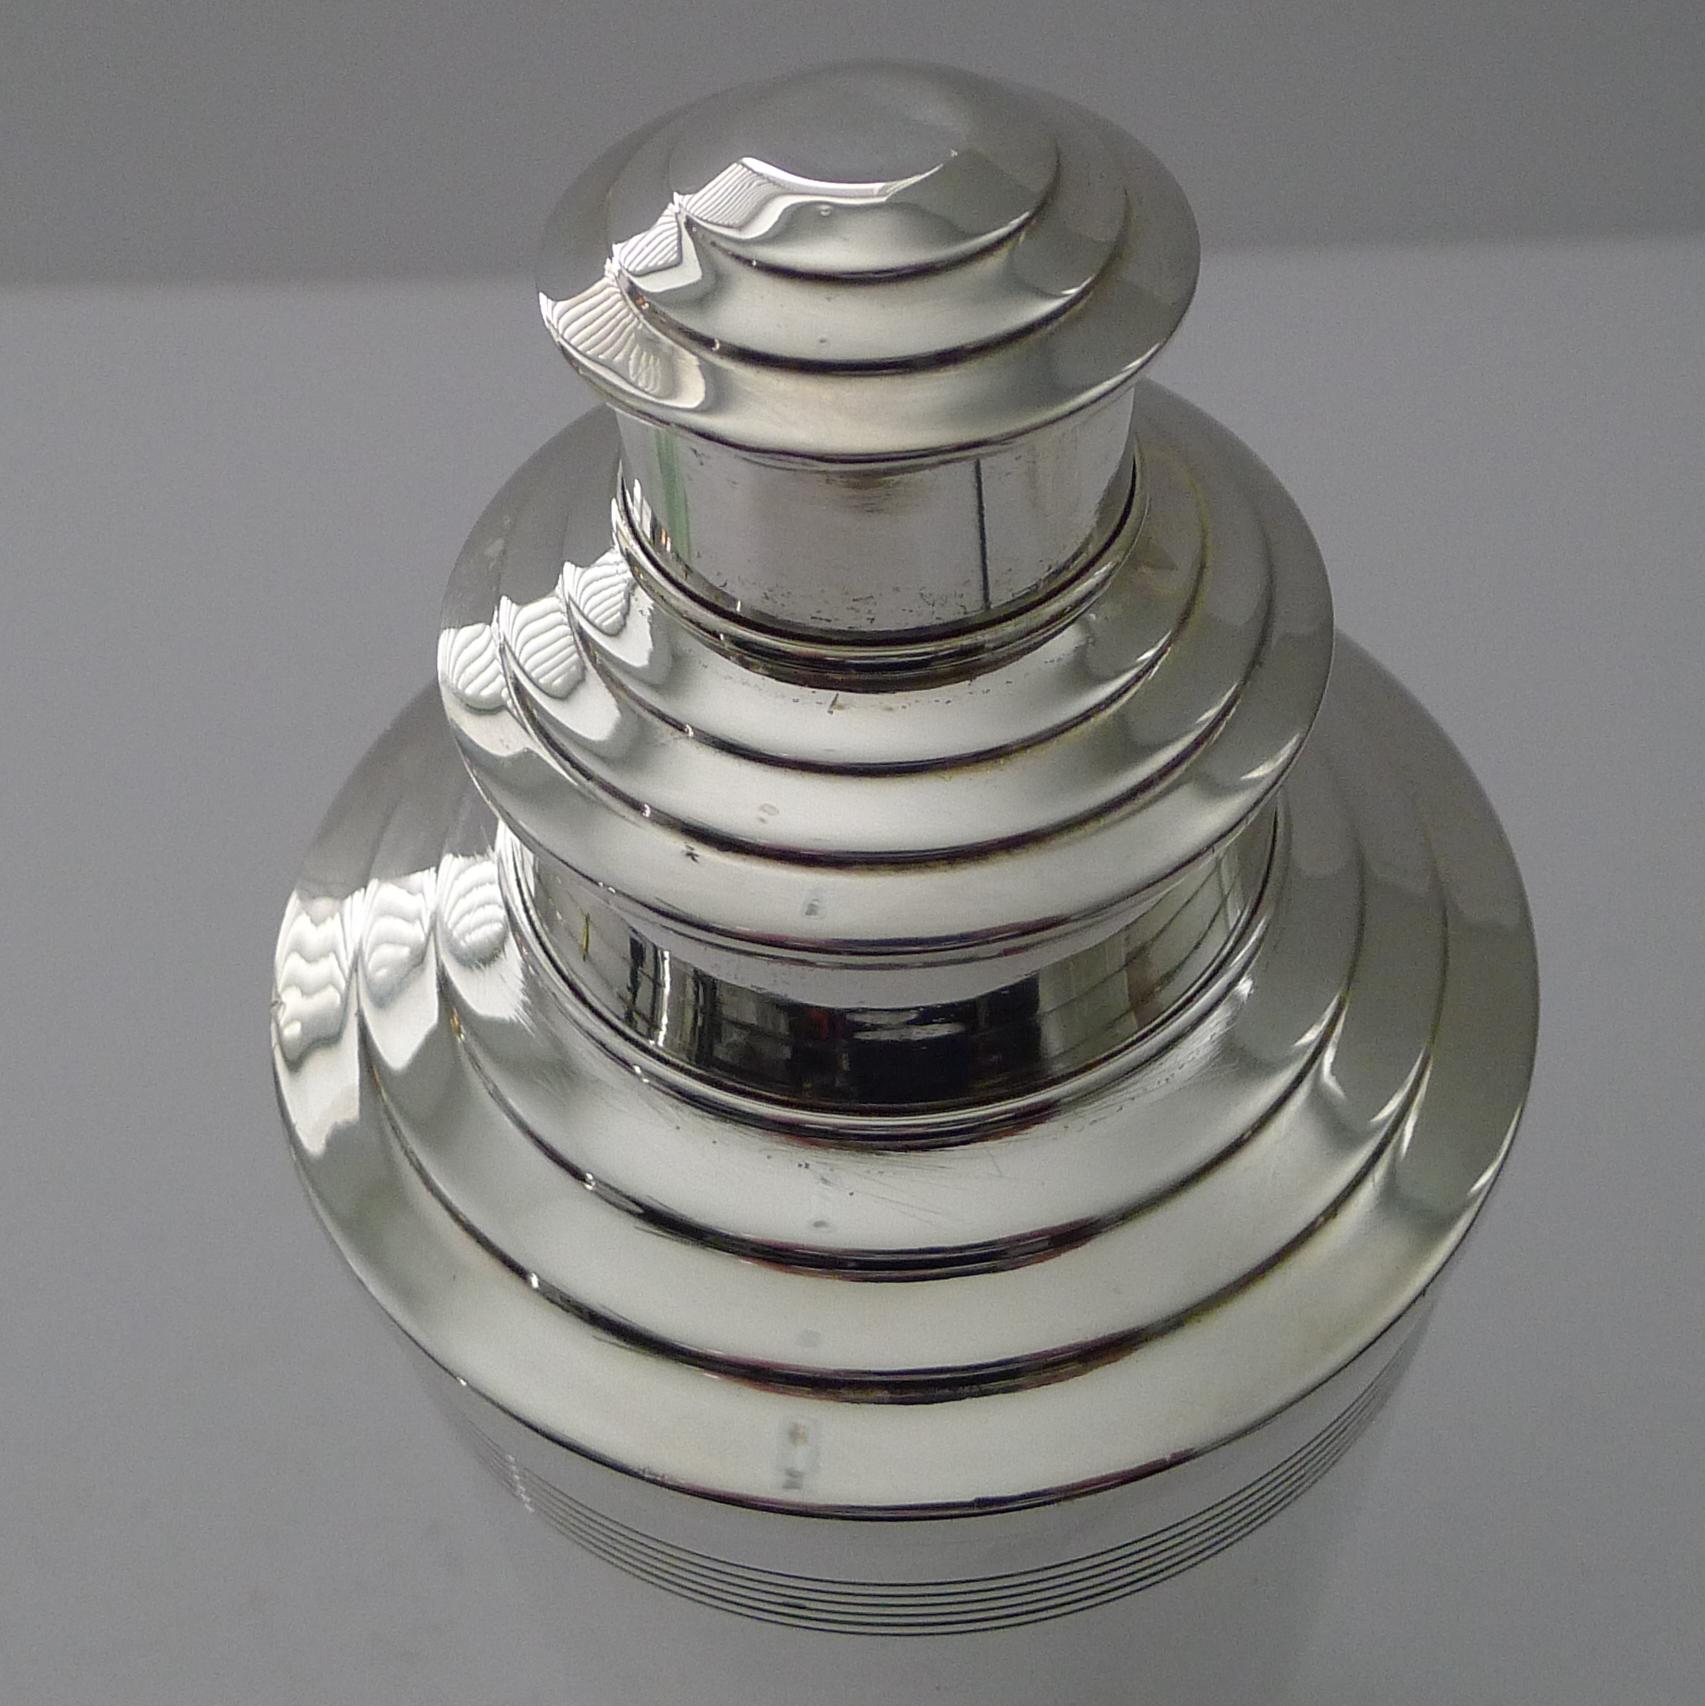 British Iconic English Art Deco Cocktail Shaker by Barker Brothers For Sale